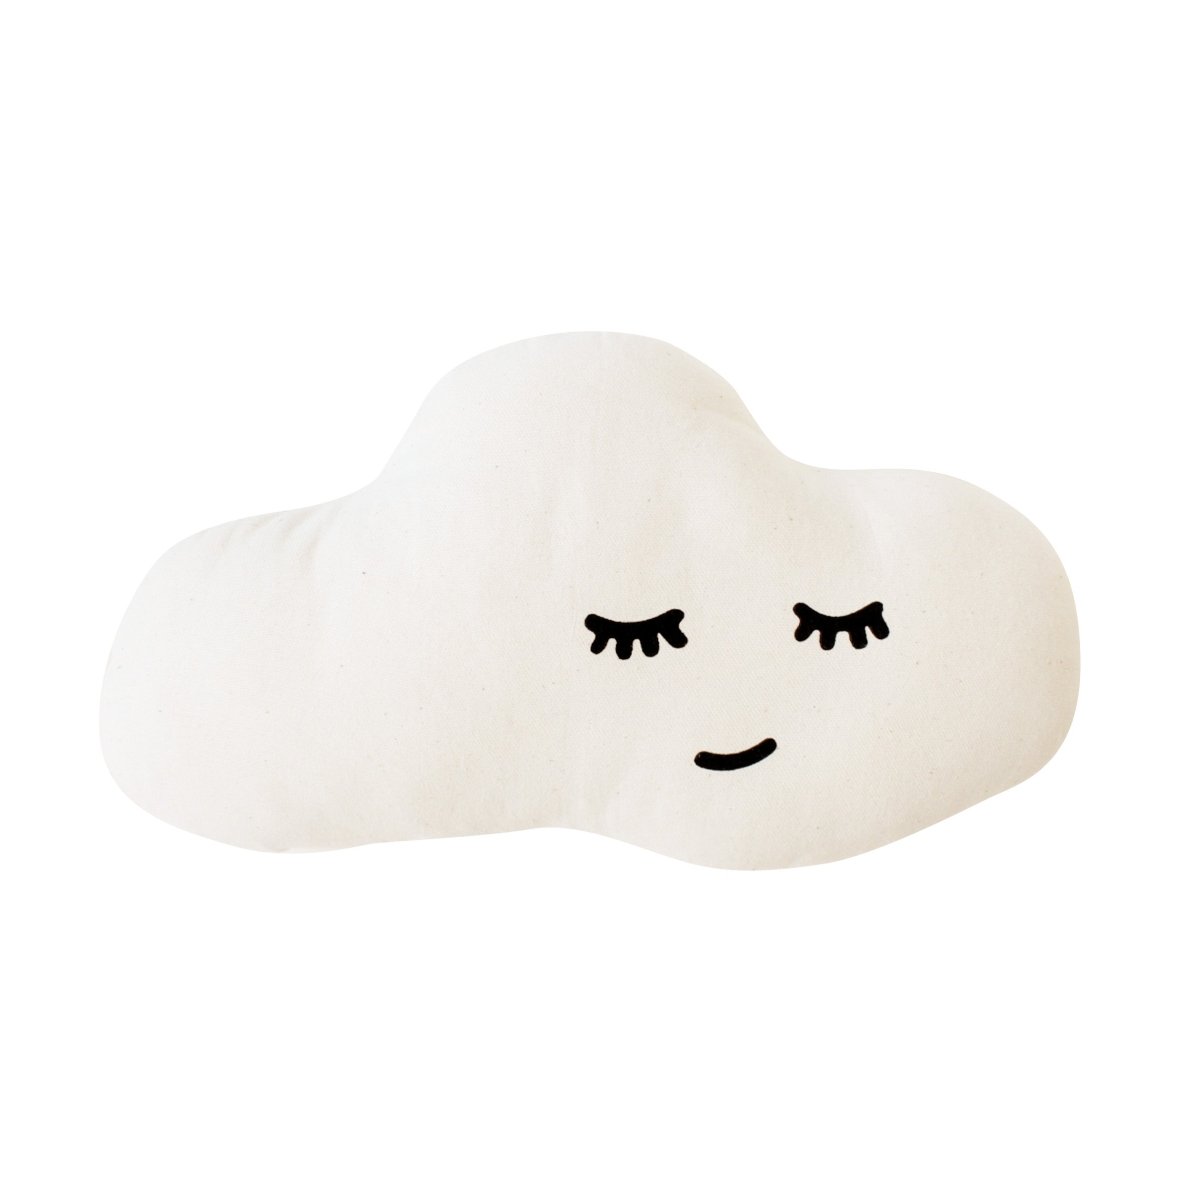 Imani Collective Cloud Pillow - lily & onyx